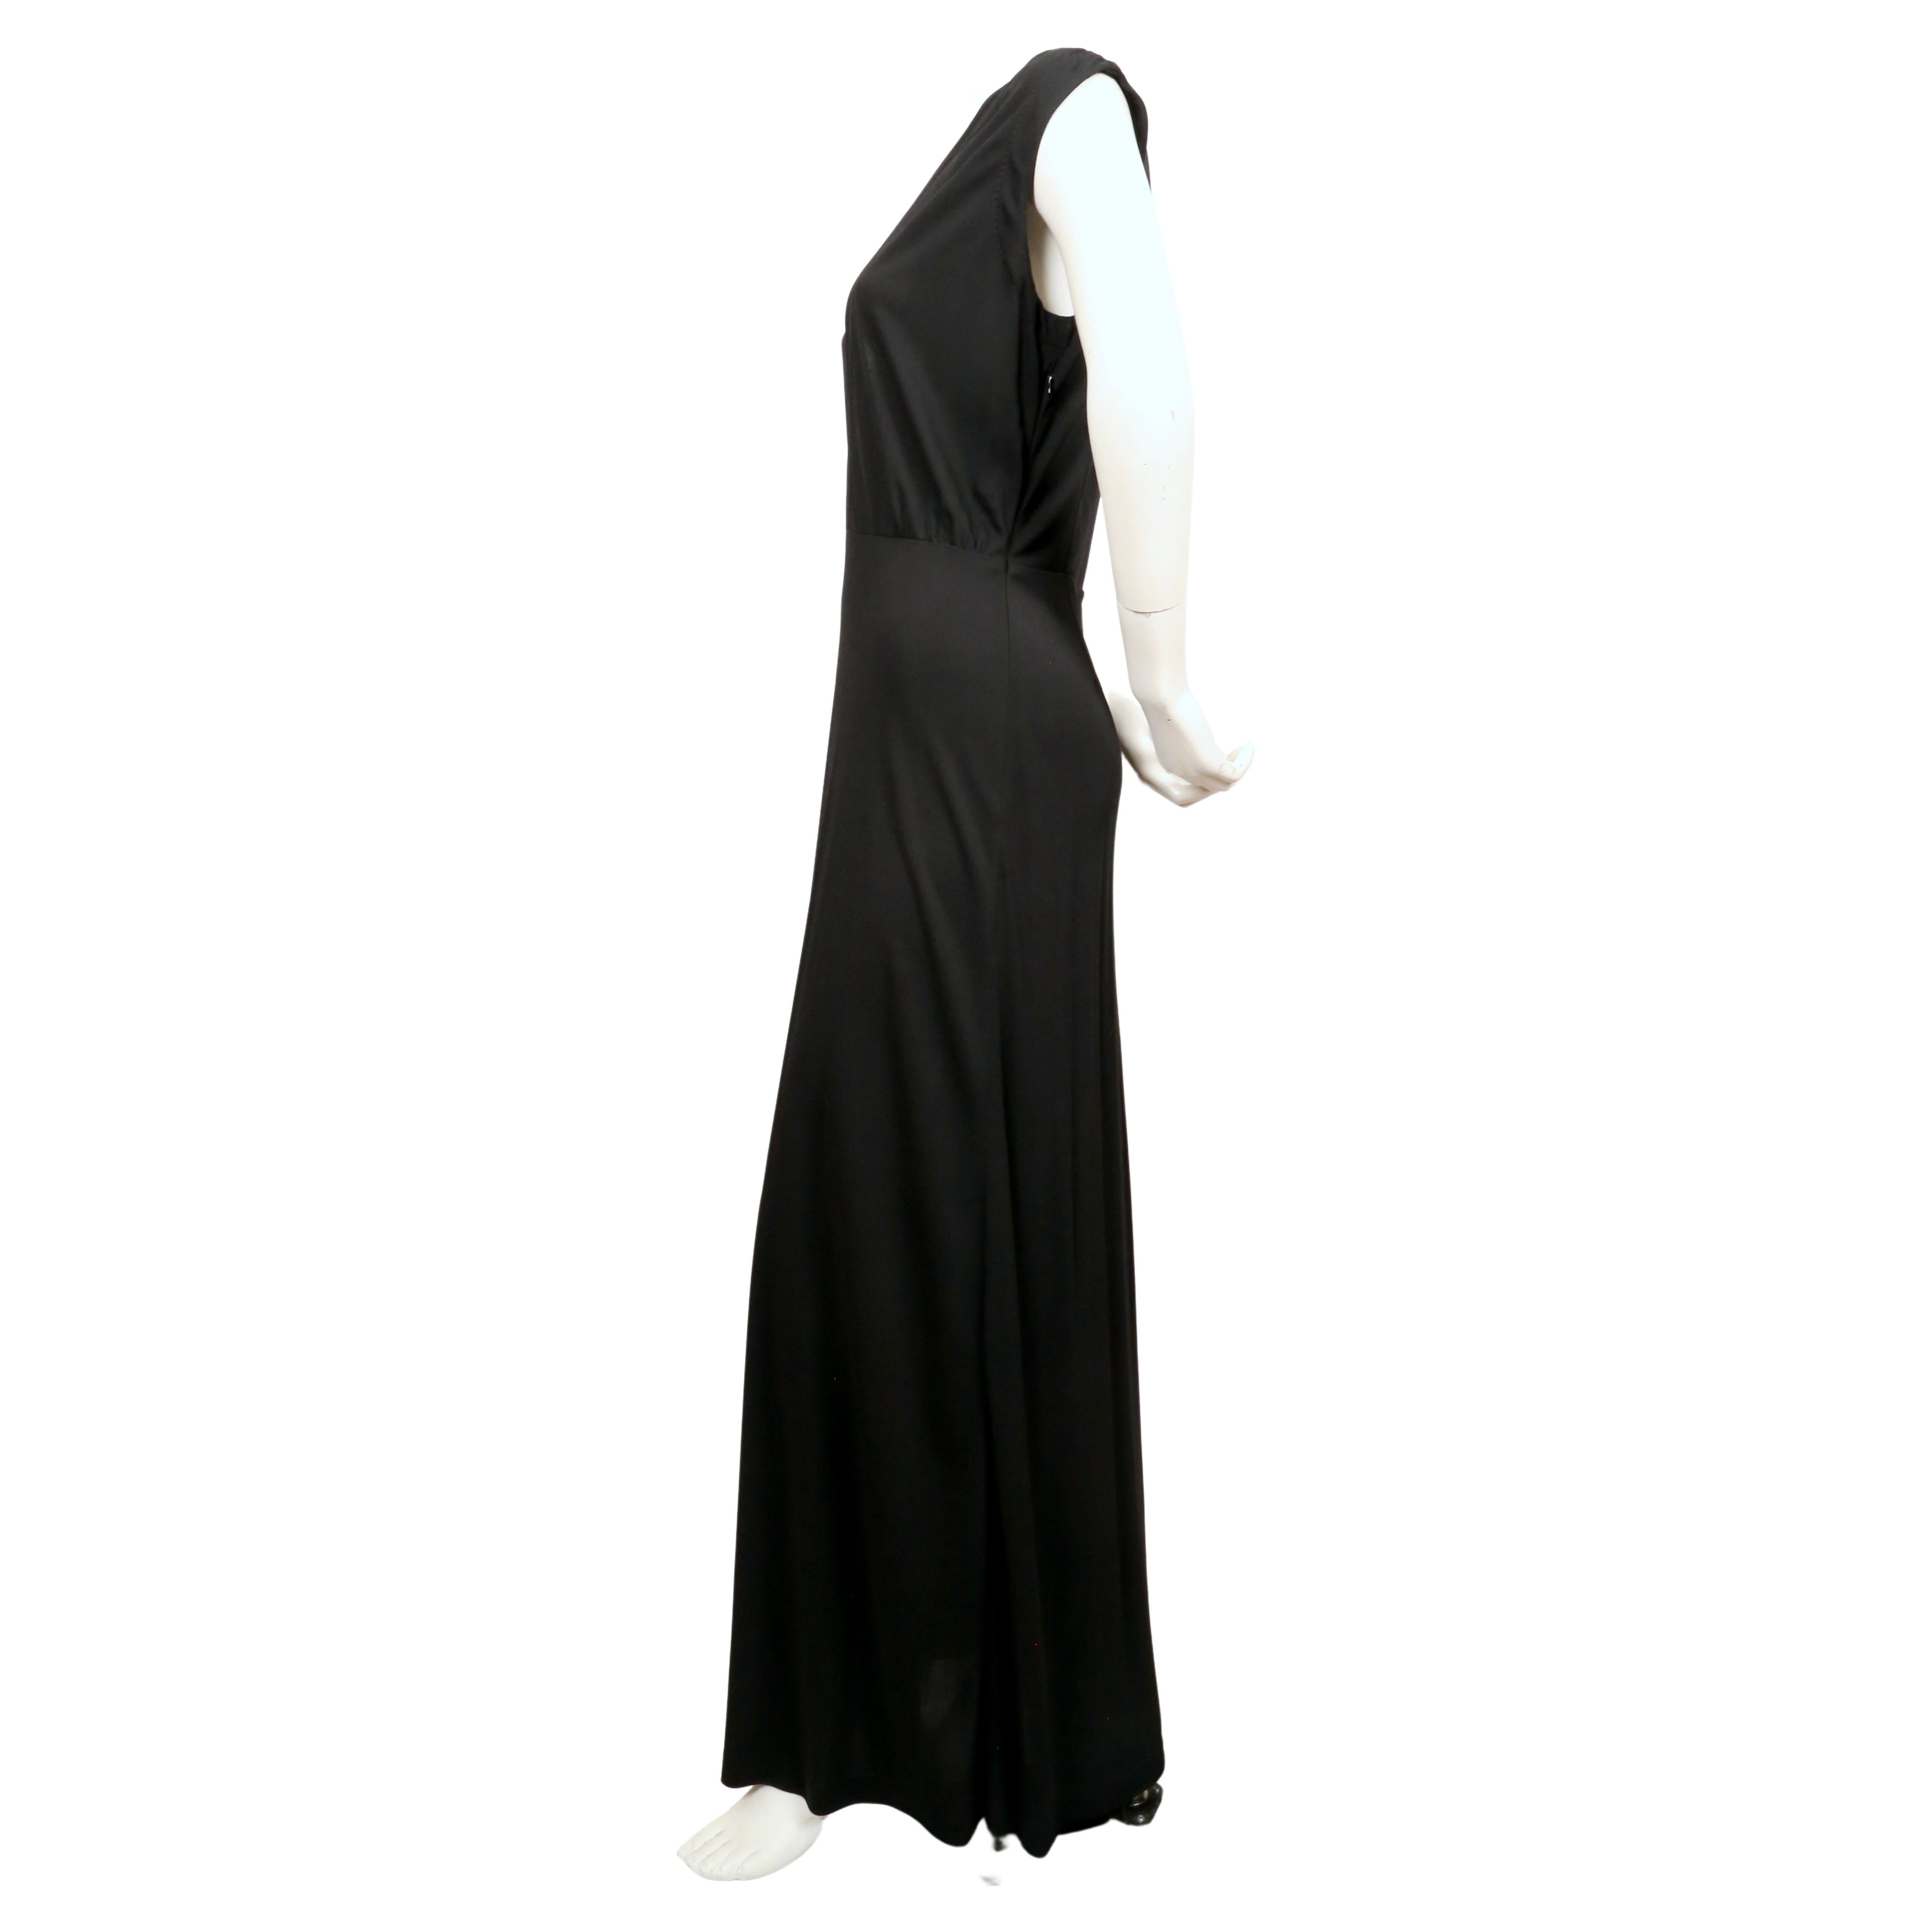 MARTIN MARGIELA RUNWAY Replica '1970's evening dress' In Good Condition For Sale In San Fransisco, CA